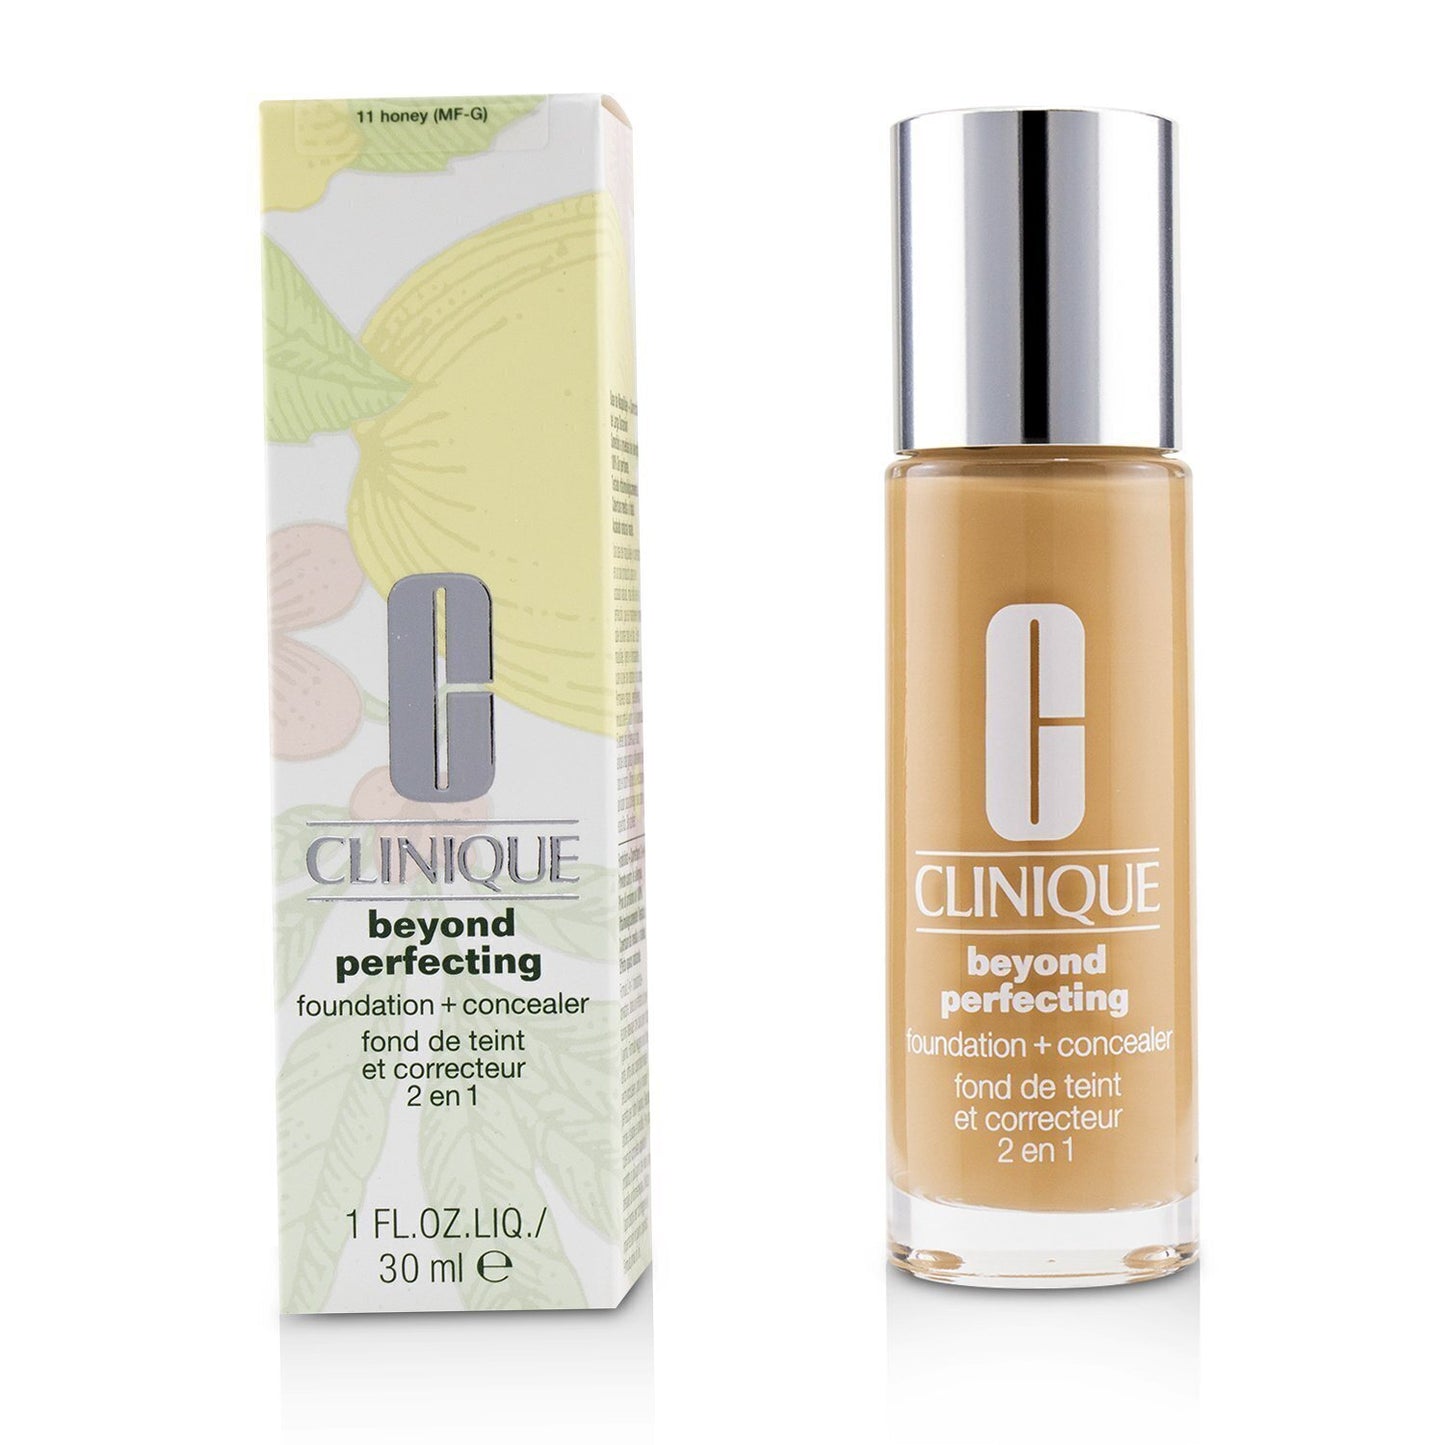 CLINIQUE - Beyond Perfecting Foundation & Concealer - # 11 Honey (MF-G) Z9FF-11 / 711948 30ml/1oz